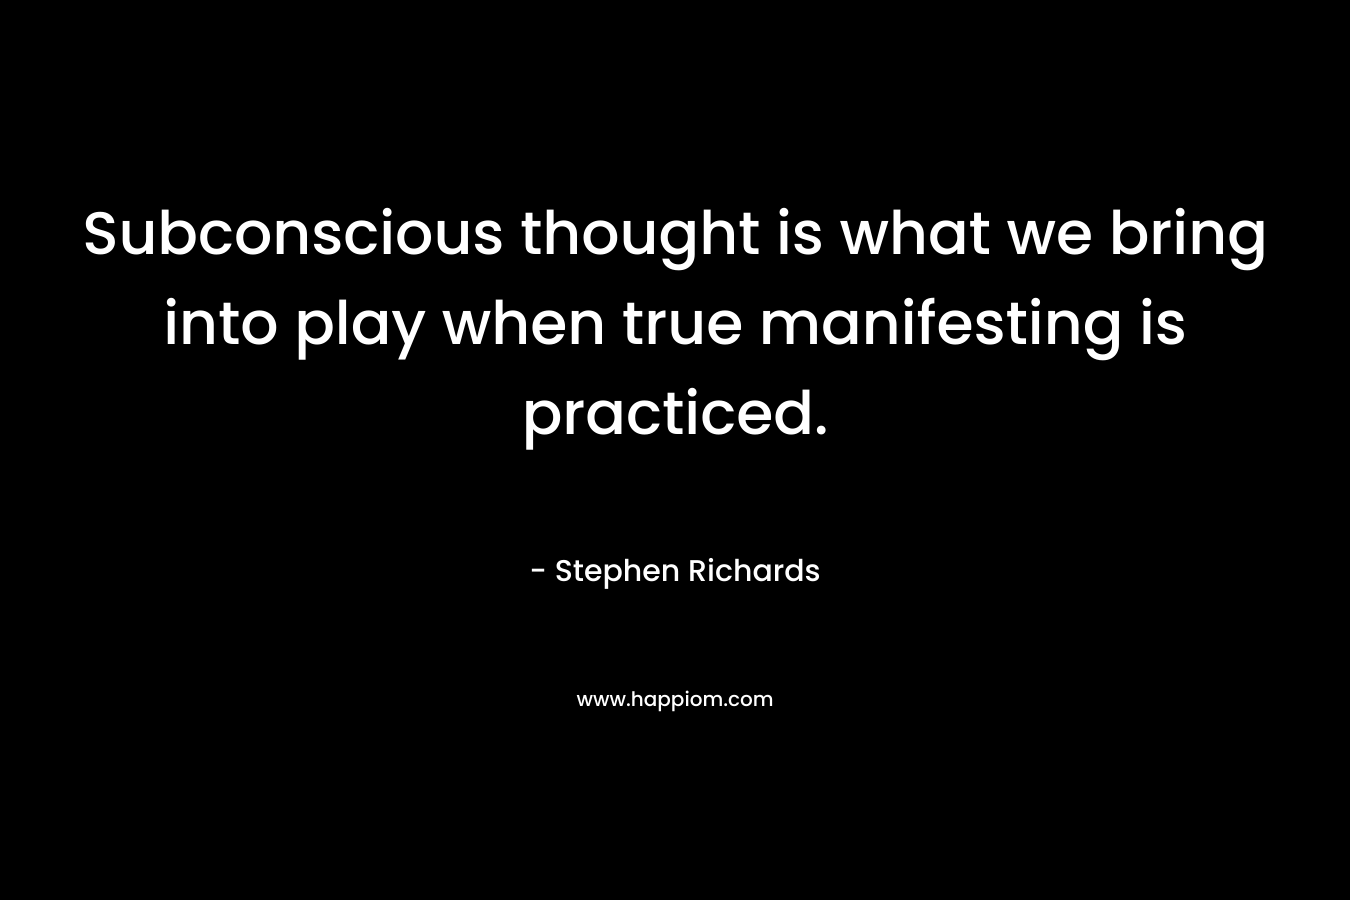 Subconscious thought is what we bring into play when true manifesting is practiced. – Stephen Richards